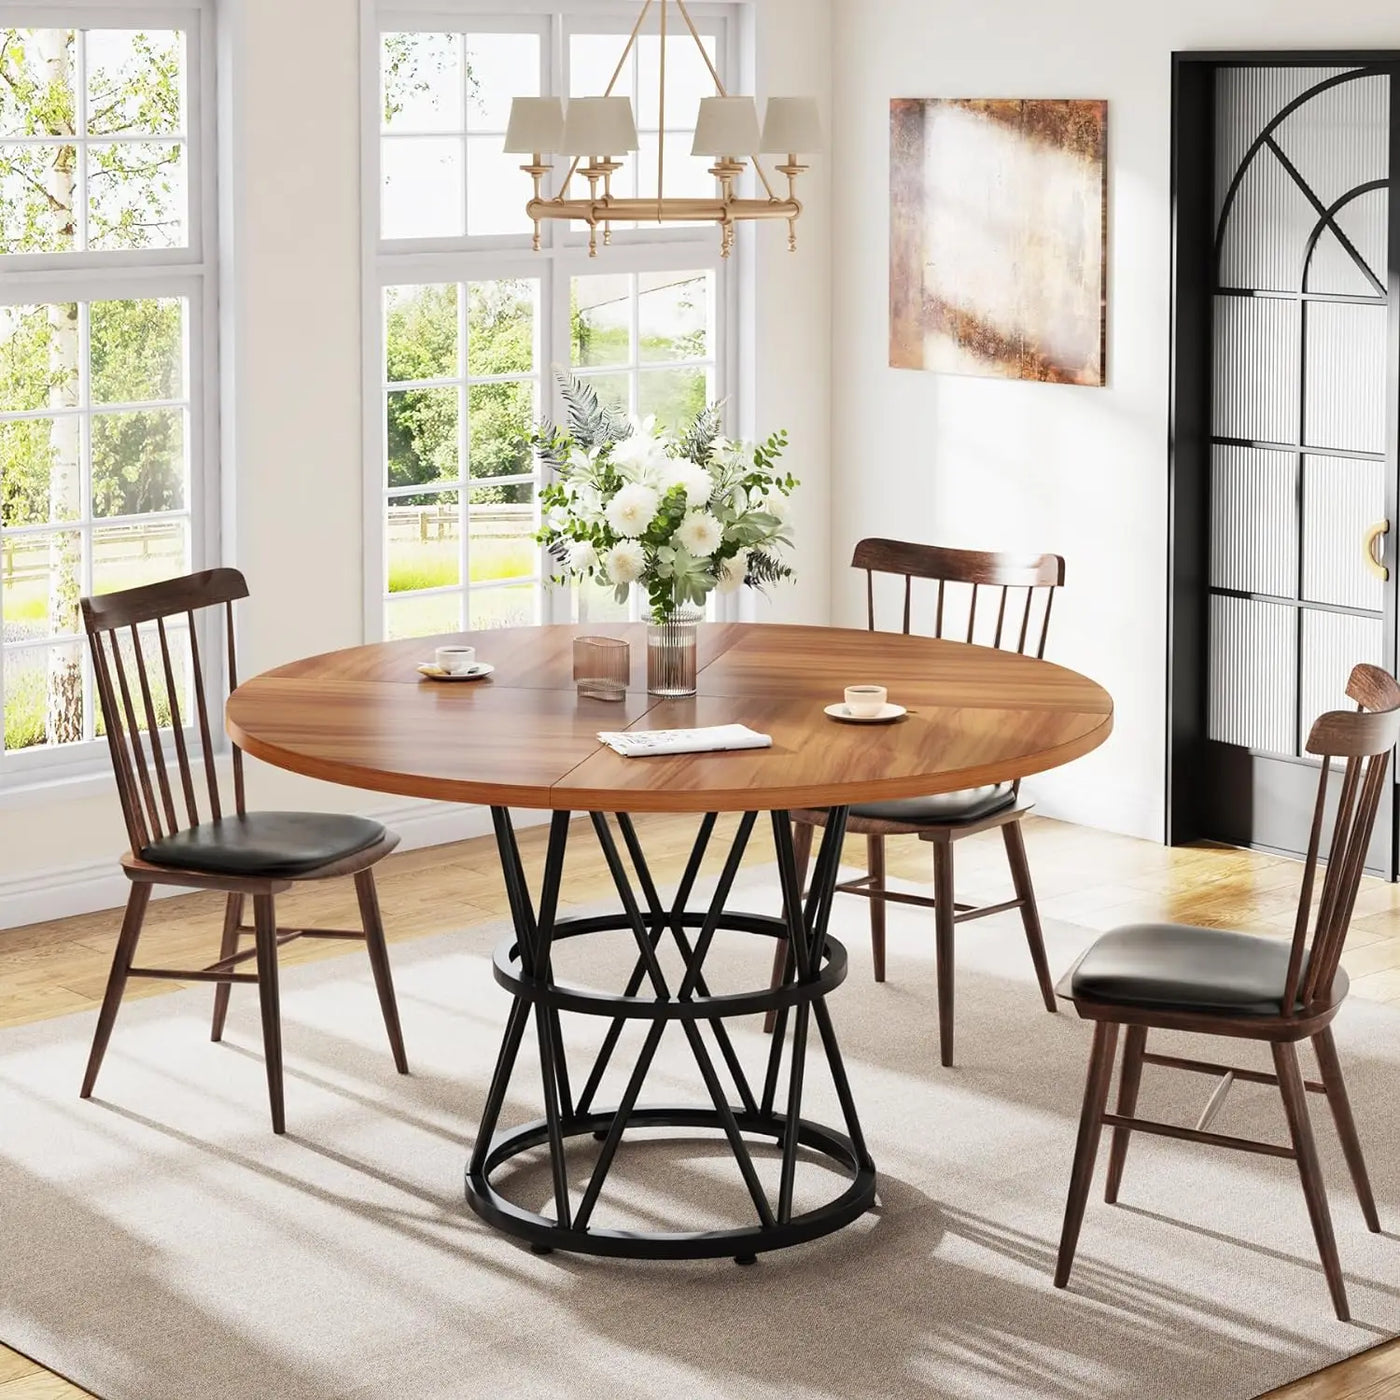 Gianna Round Dining Table 47 Inches | Kitchen Table Circle Wood Dining Room Metal Base